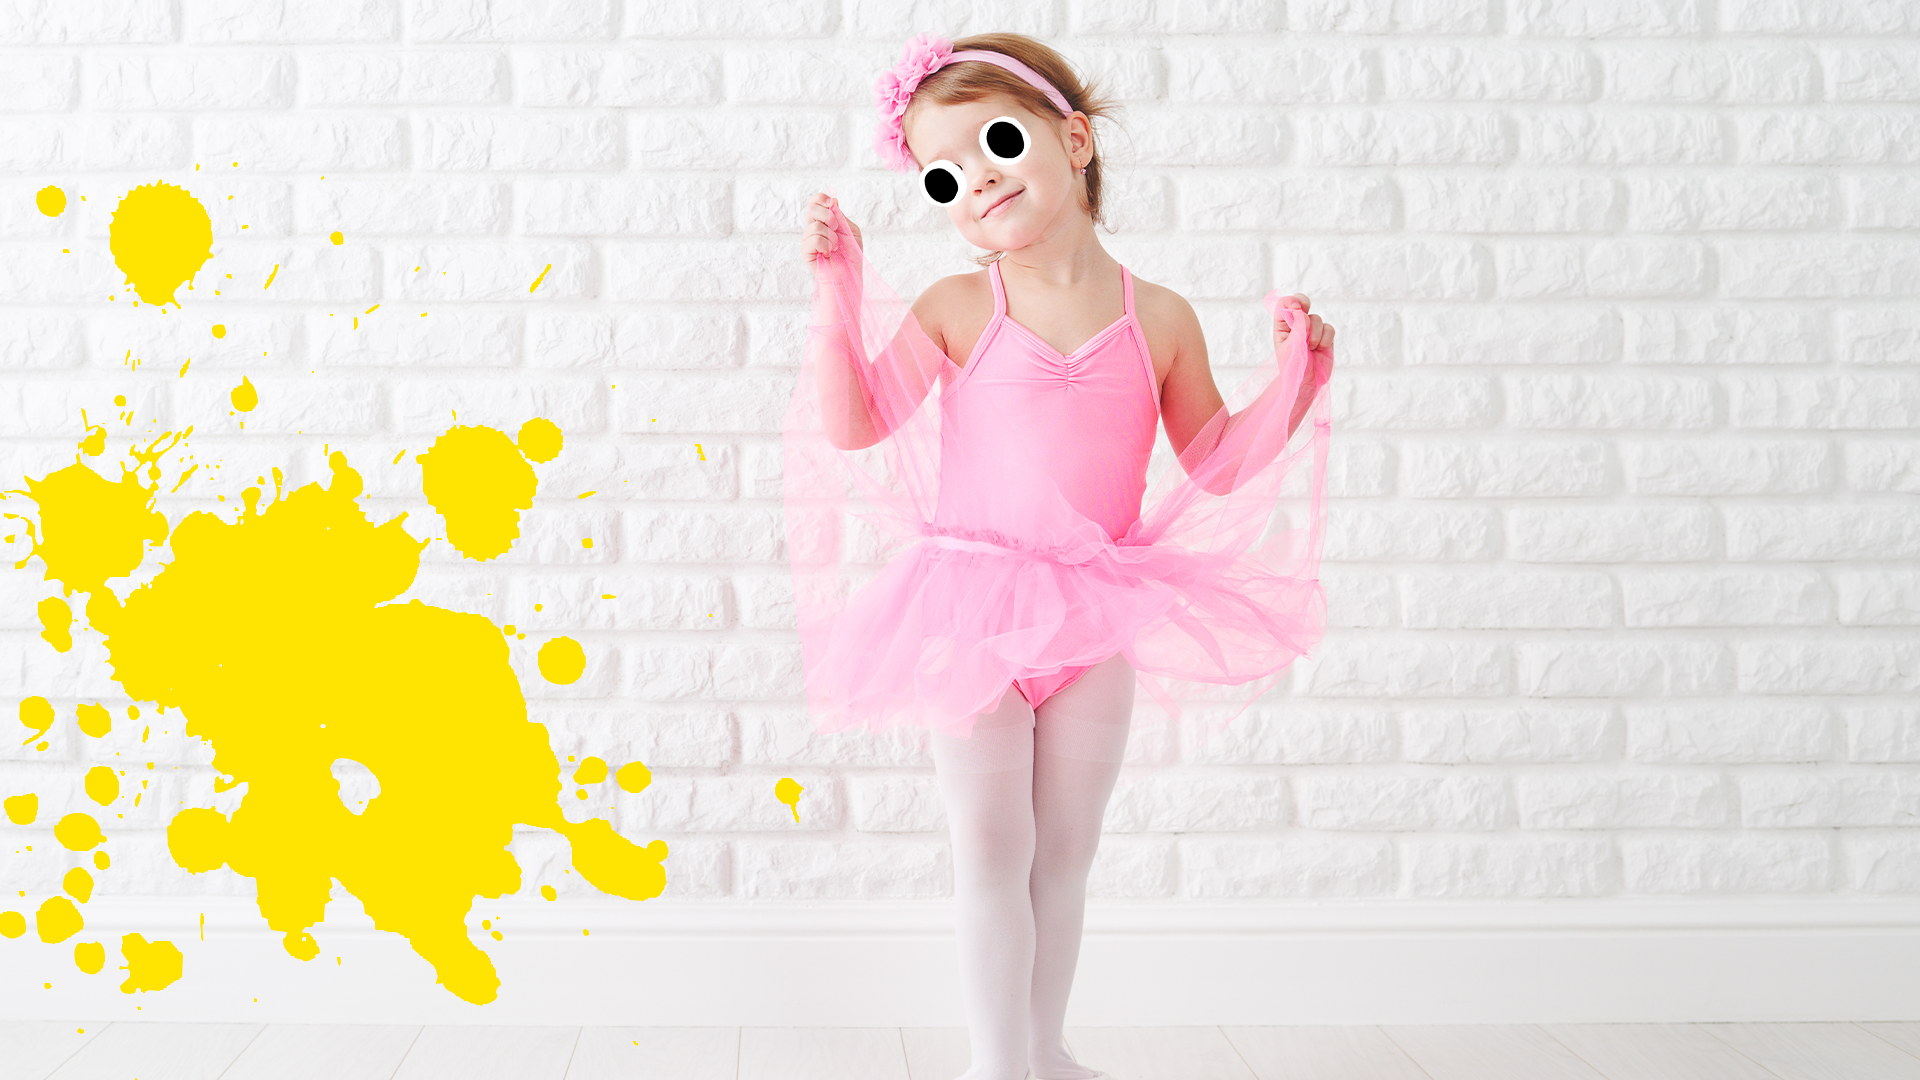 Little girl in tutu on white background with yellow splat 